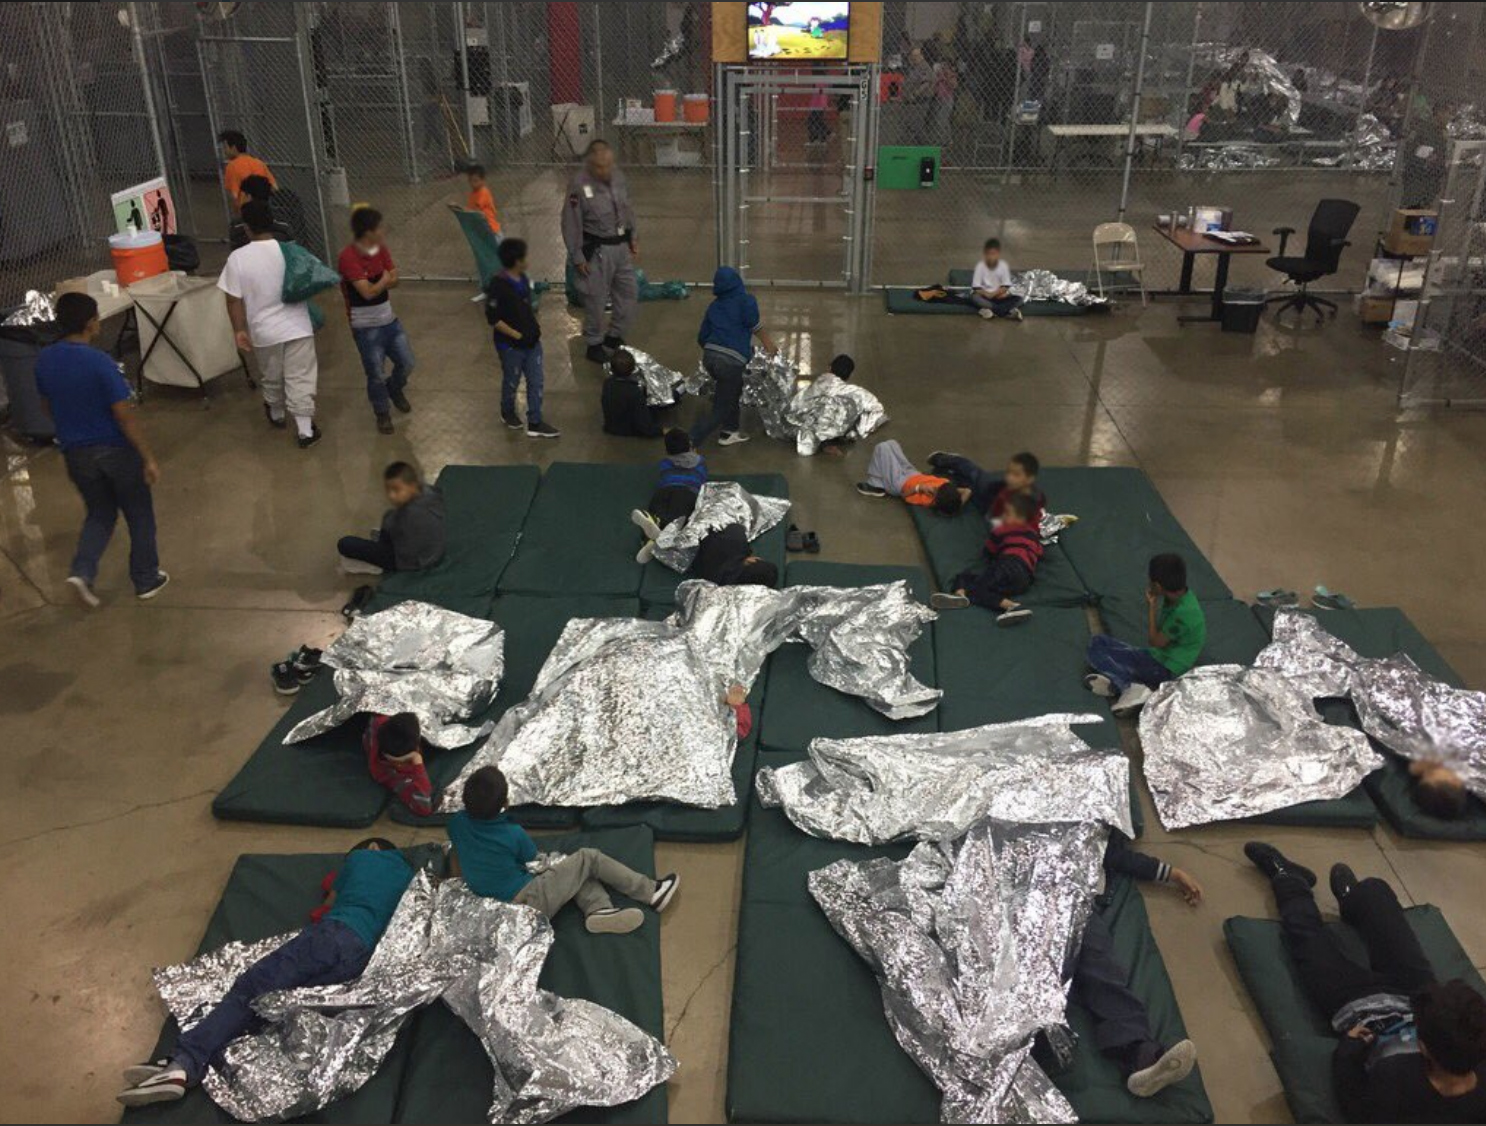 On the Border Family Separation Crisis: There are Enough Pictures Now